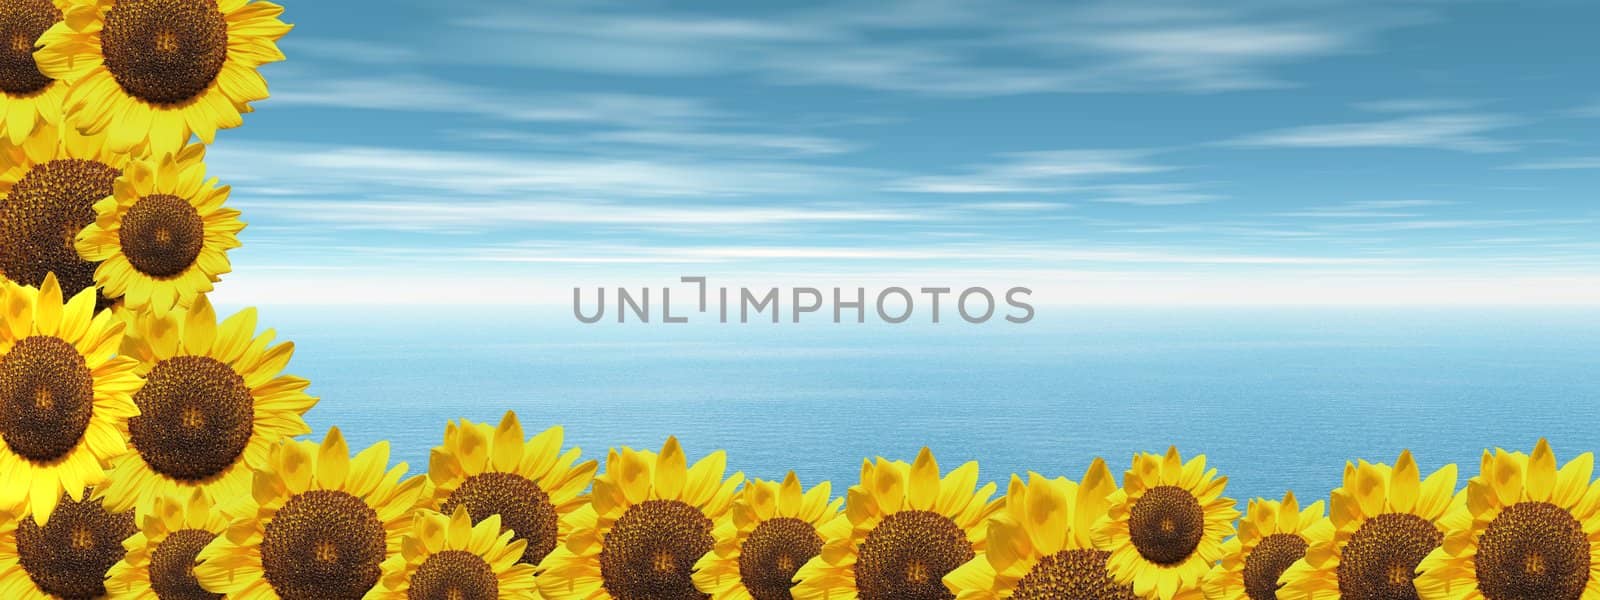 Background of cloudy blue sky and ocean with lots of sunflowers down and on the left side